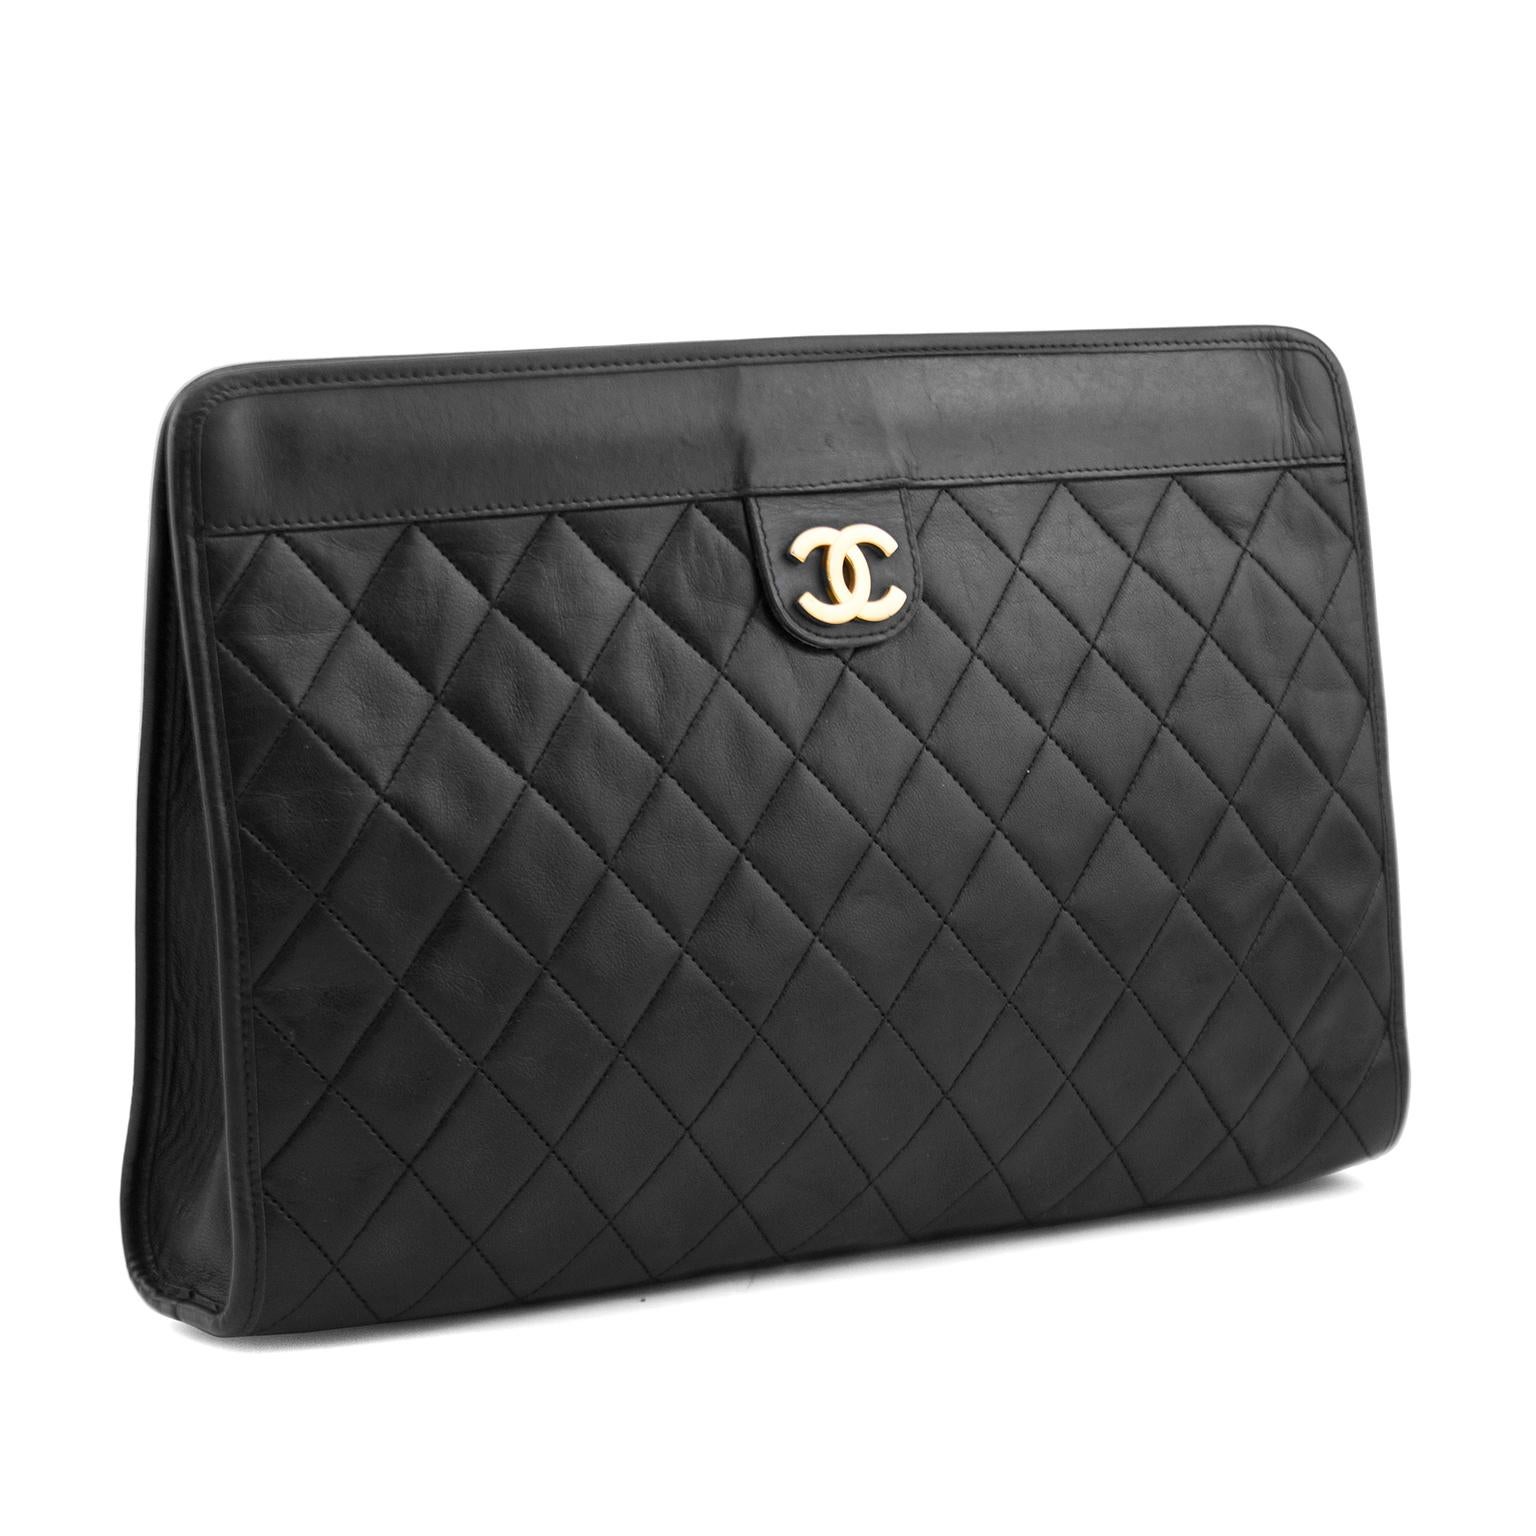 Black quilted leather clutch from Chanel featuring a gold-tone signature logo on leather tab at the front, a concealed magnetic fastening and signature maroon red lining. The sophisticated quality and timeless style of this clutch lend a look of